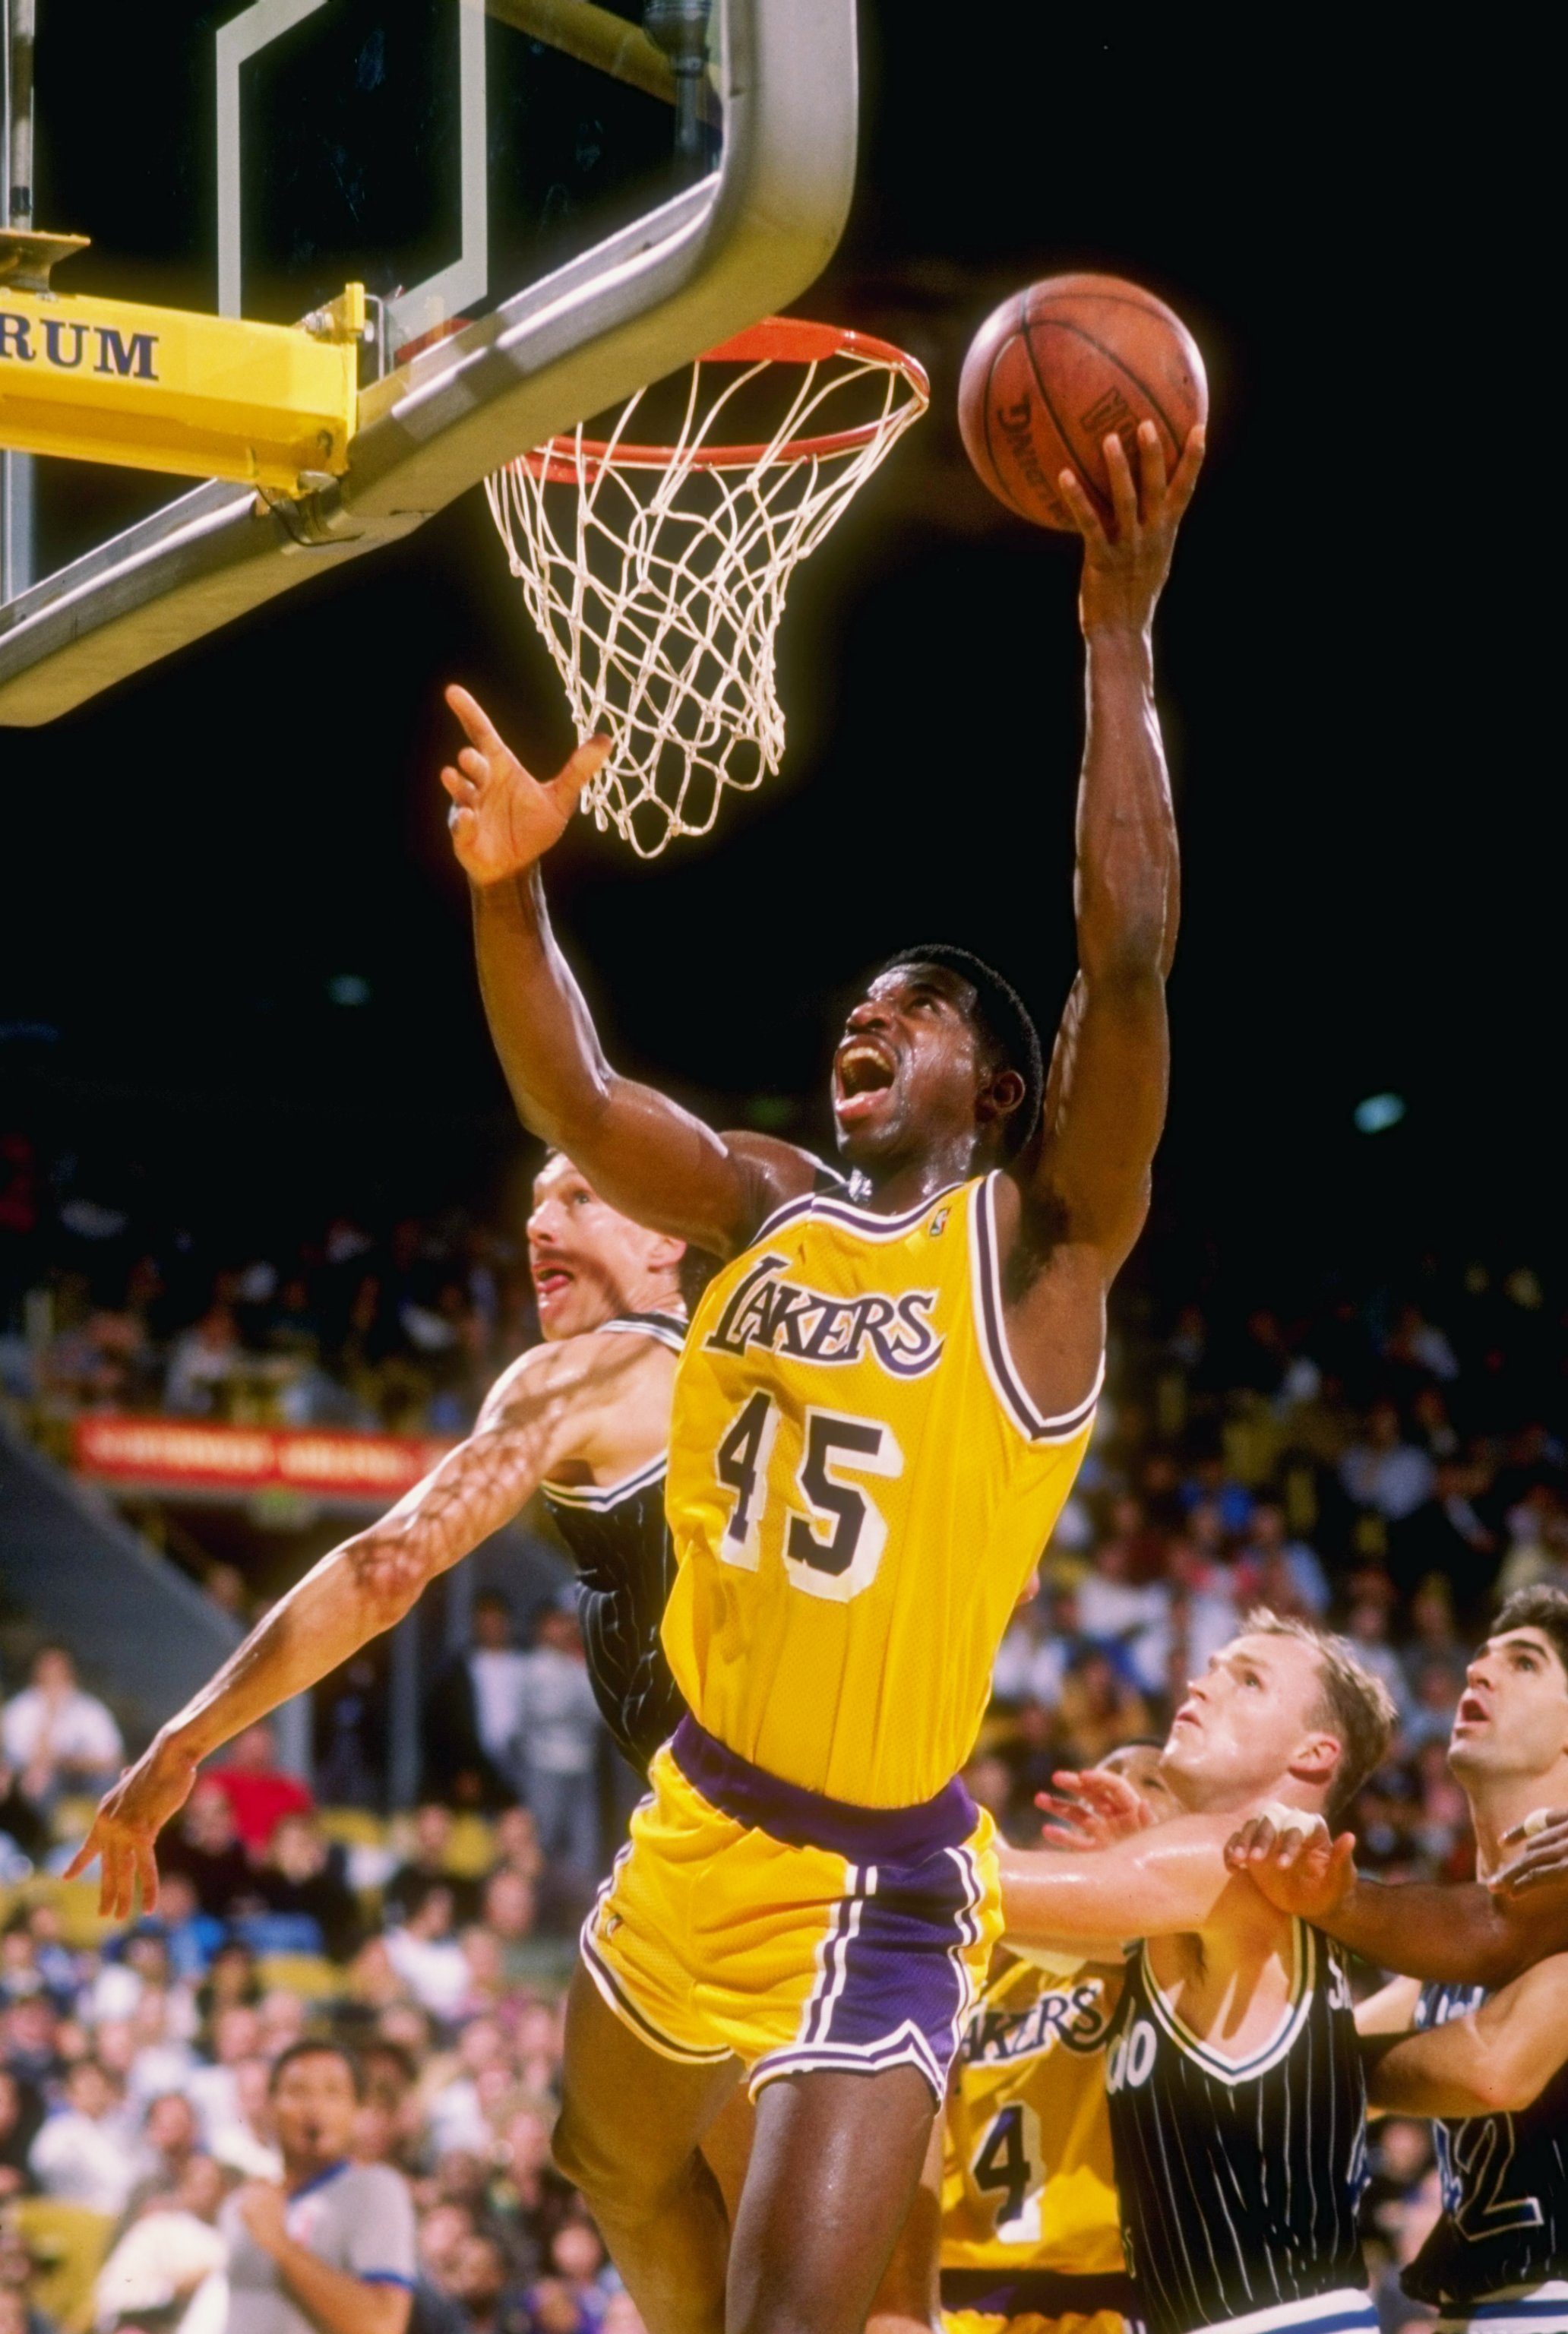 Top 25 Players in Los Angeles Lakers History: Where Does Kobe Bryant